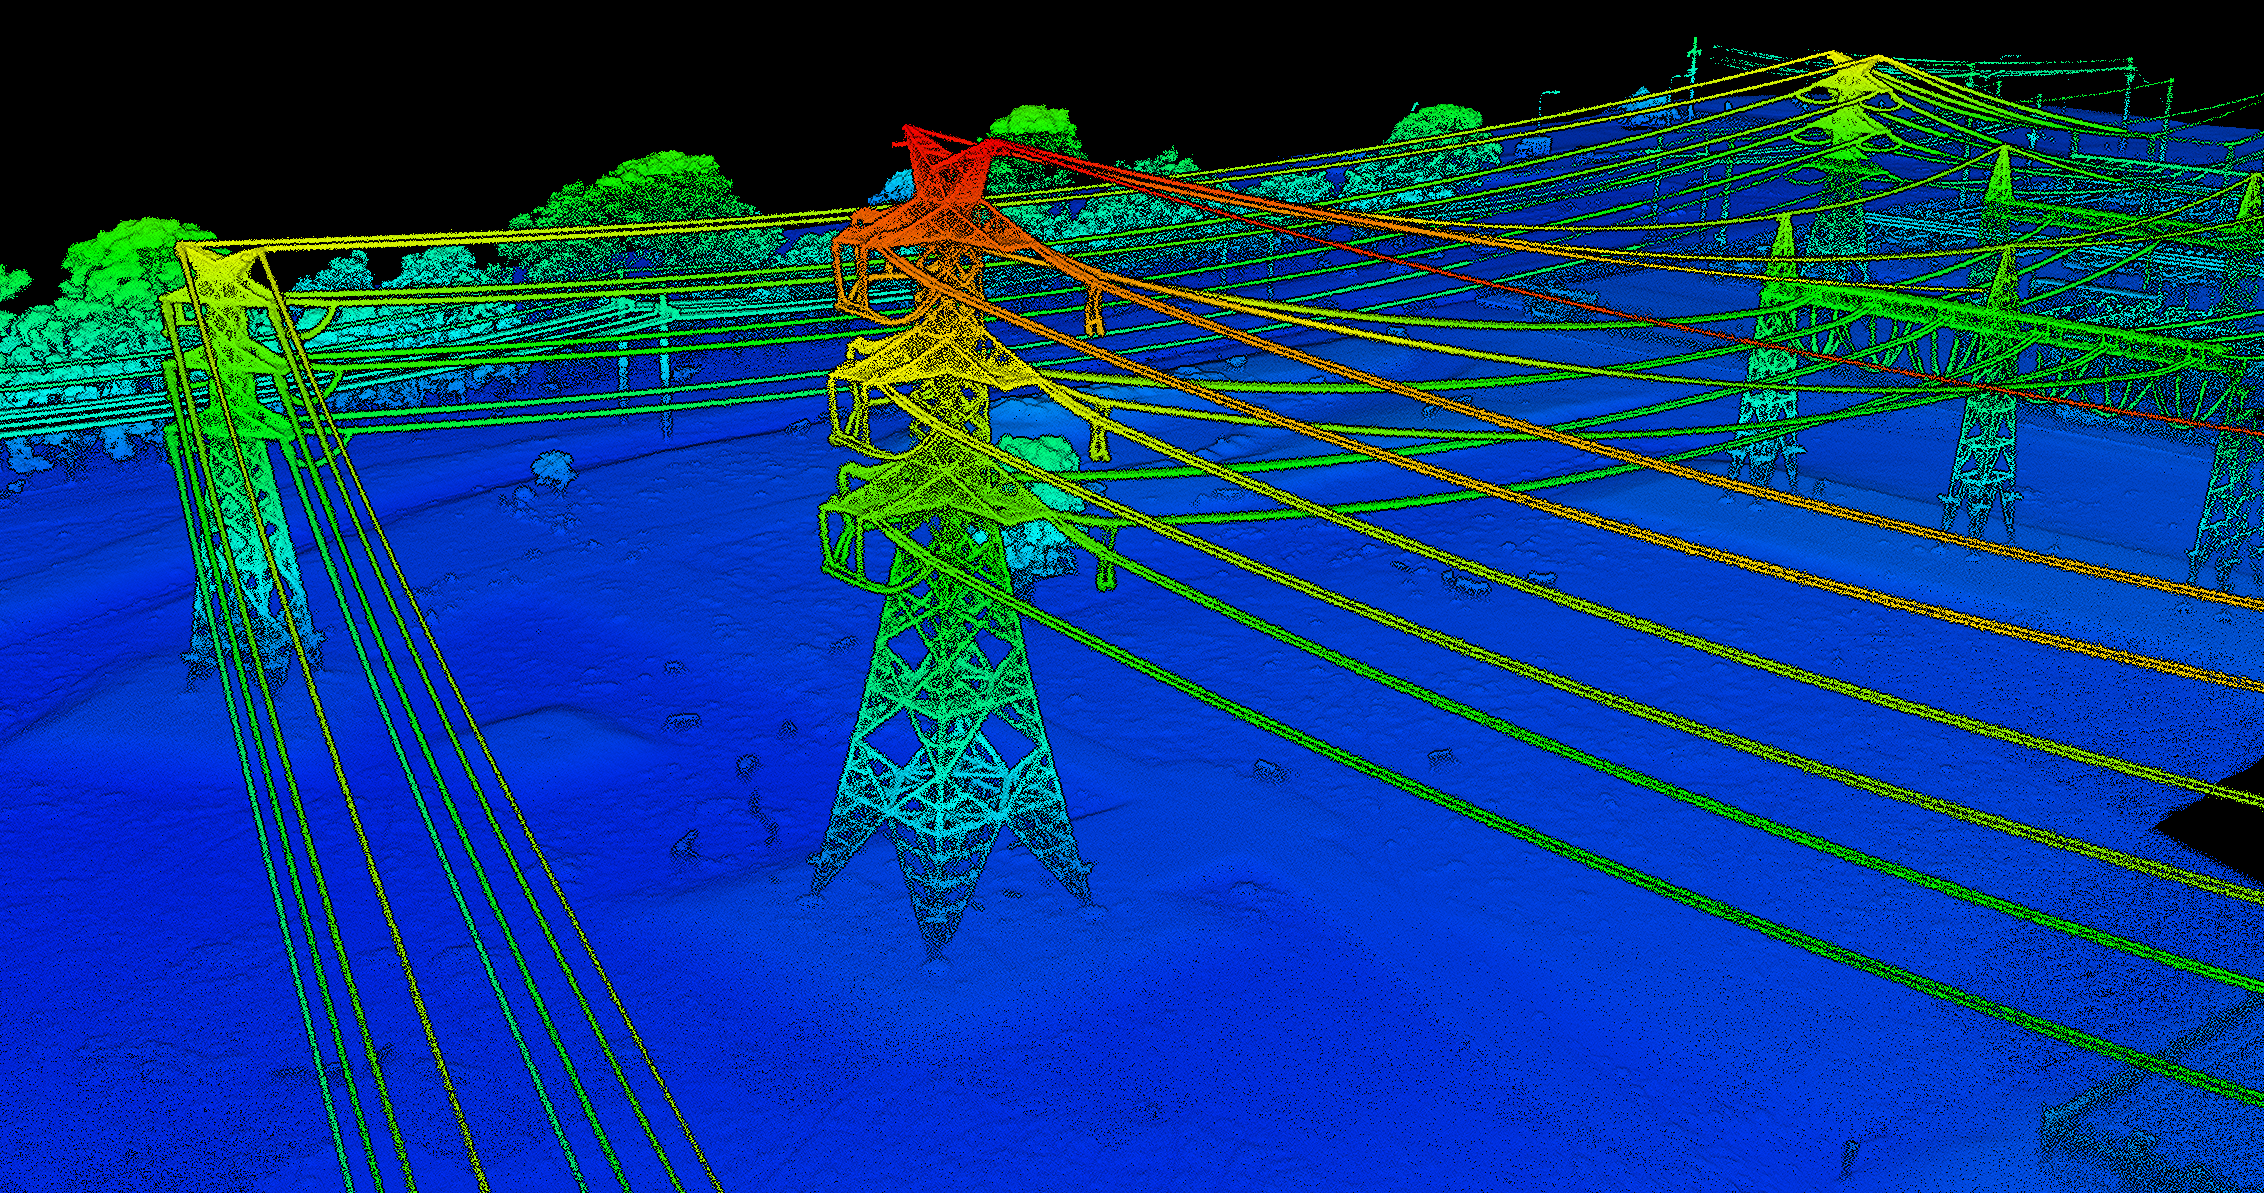 Drone Lidar used for creating a 3D Model and outputting a LAS file for Power line Surveying